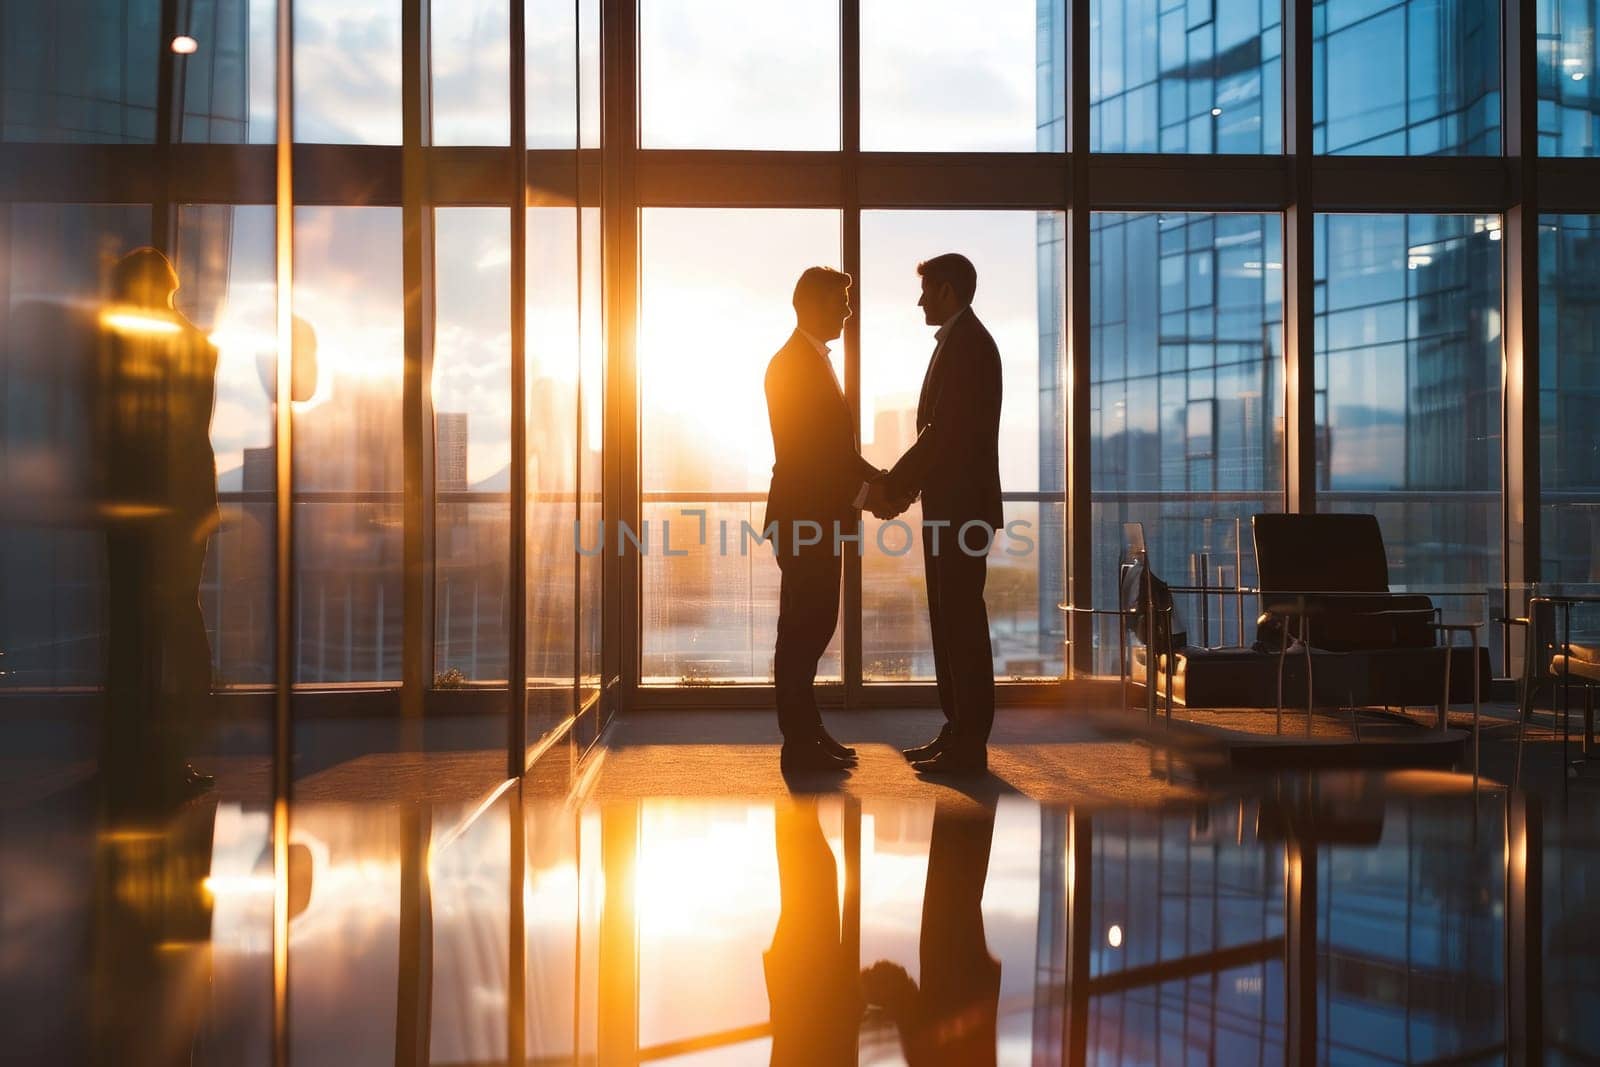 Handshake, Silhouettes of two businessmen shaking hands after the deal is done in office by nijieimu